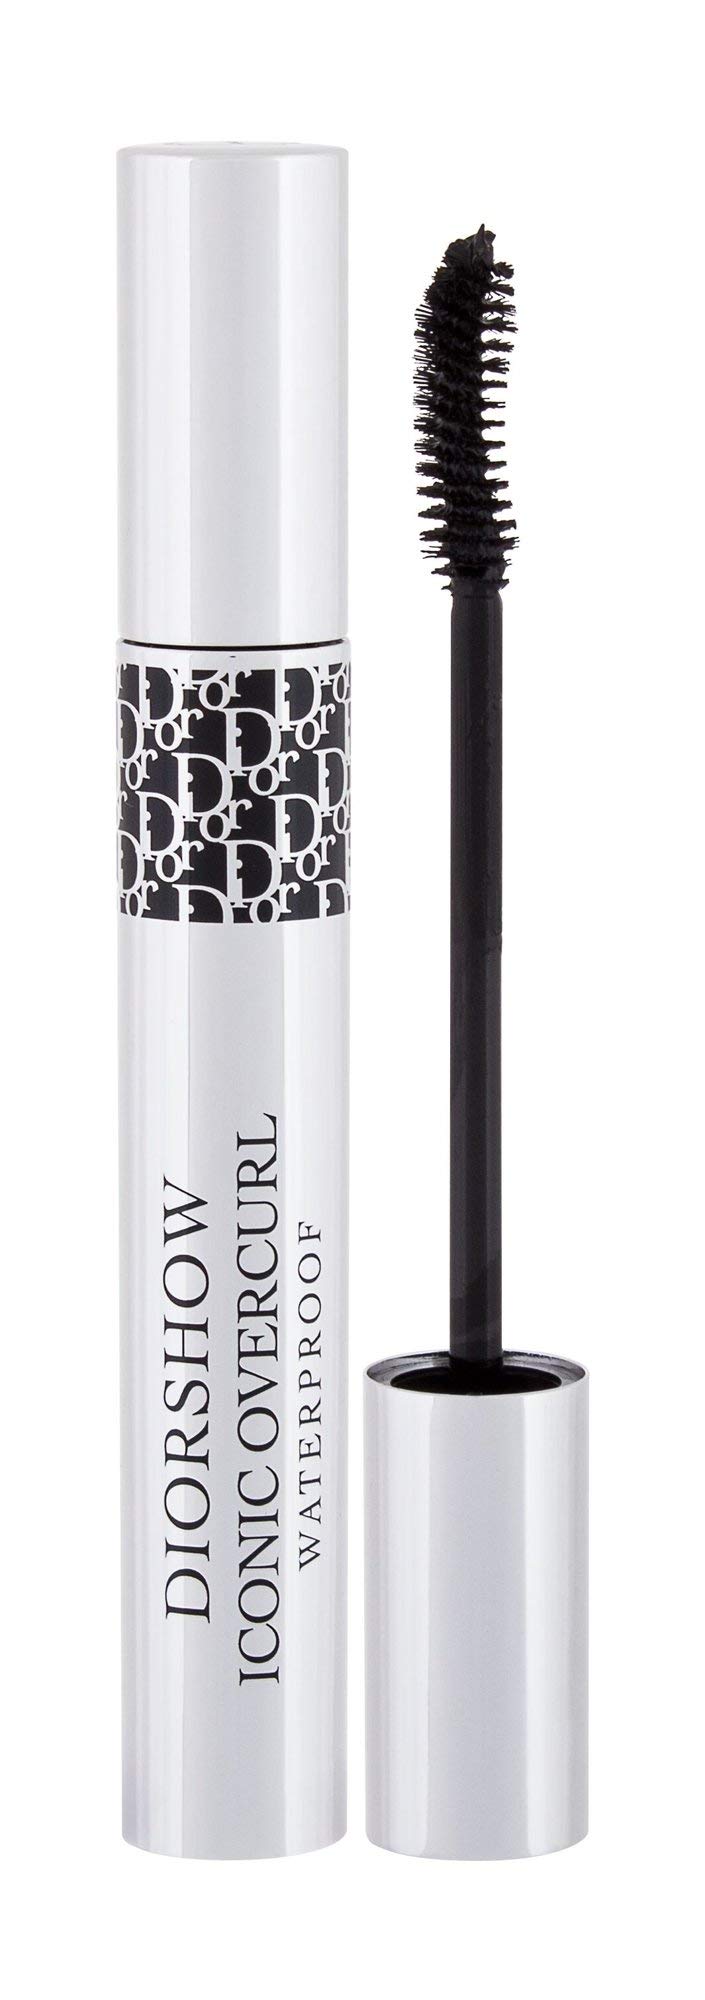 Dior Diorshow (091) Waterproof 0.21 Iconic Mascara Ounce Black Overcurl Spectacular 24H